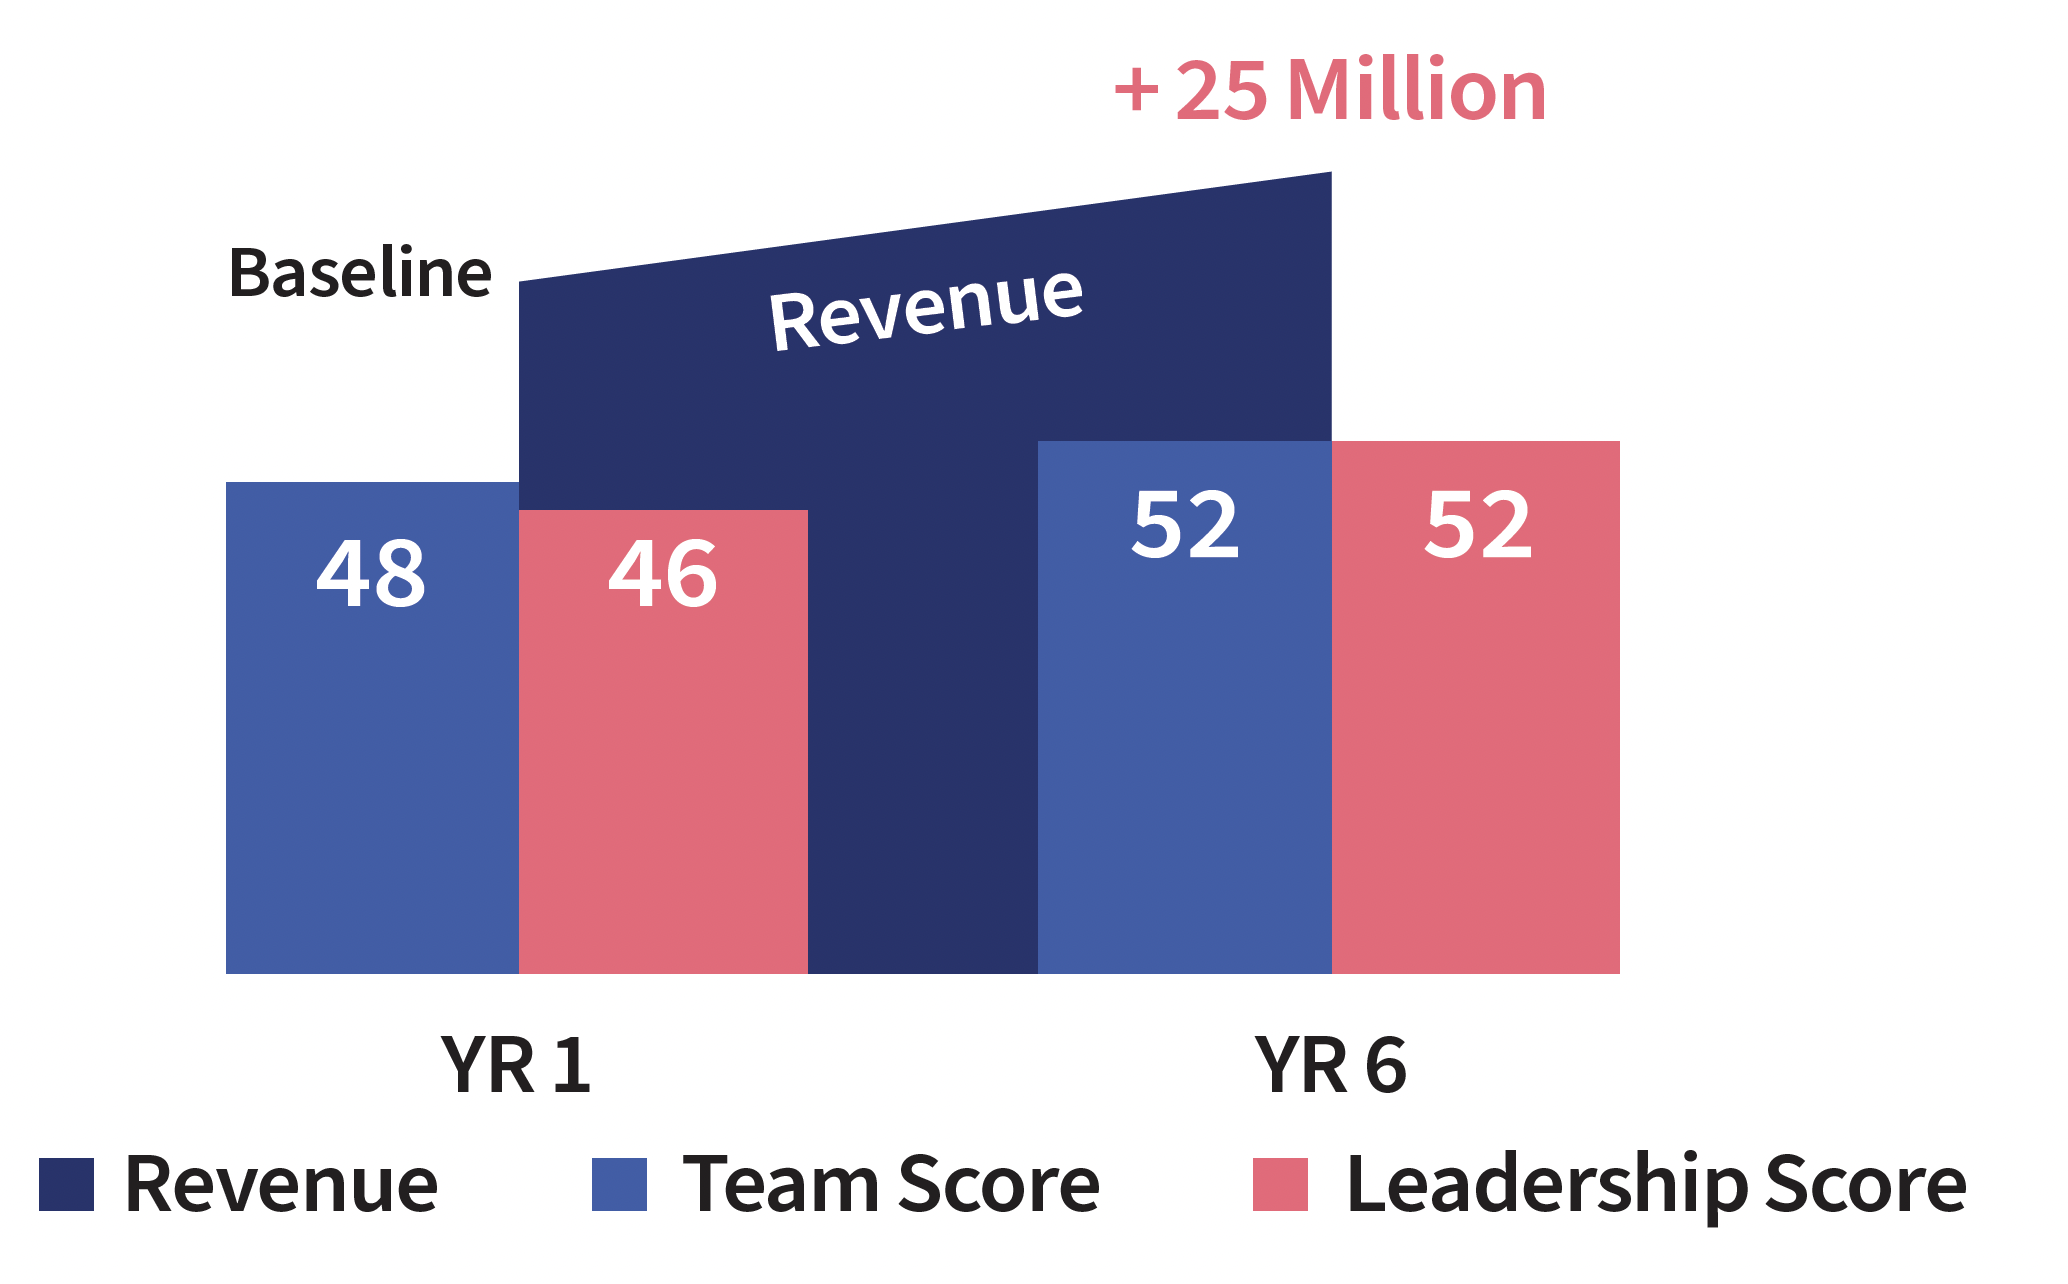 Revenue Increases With Talent